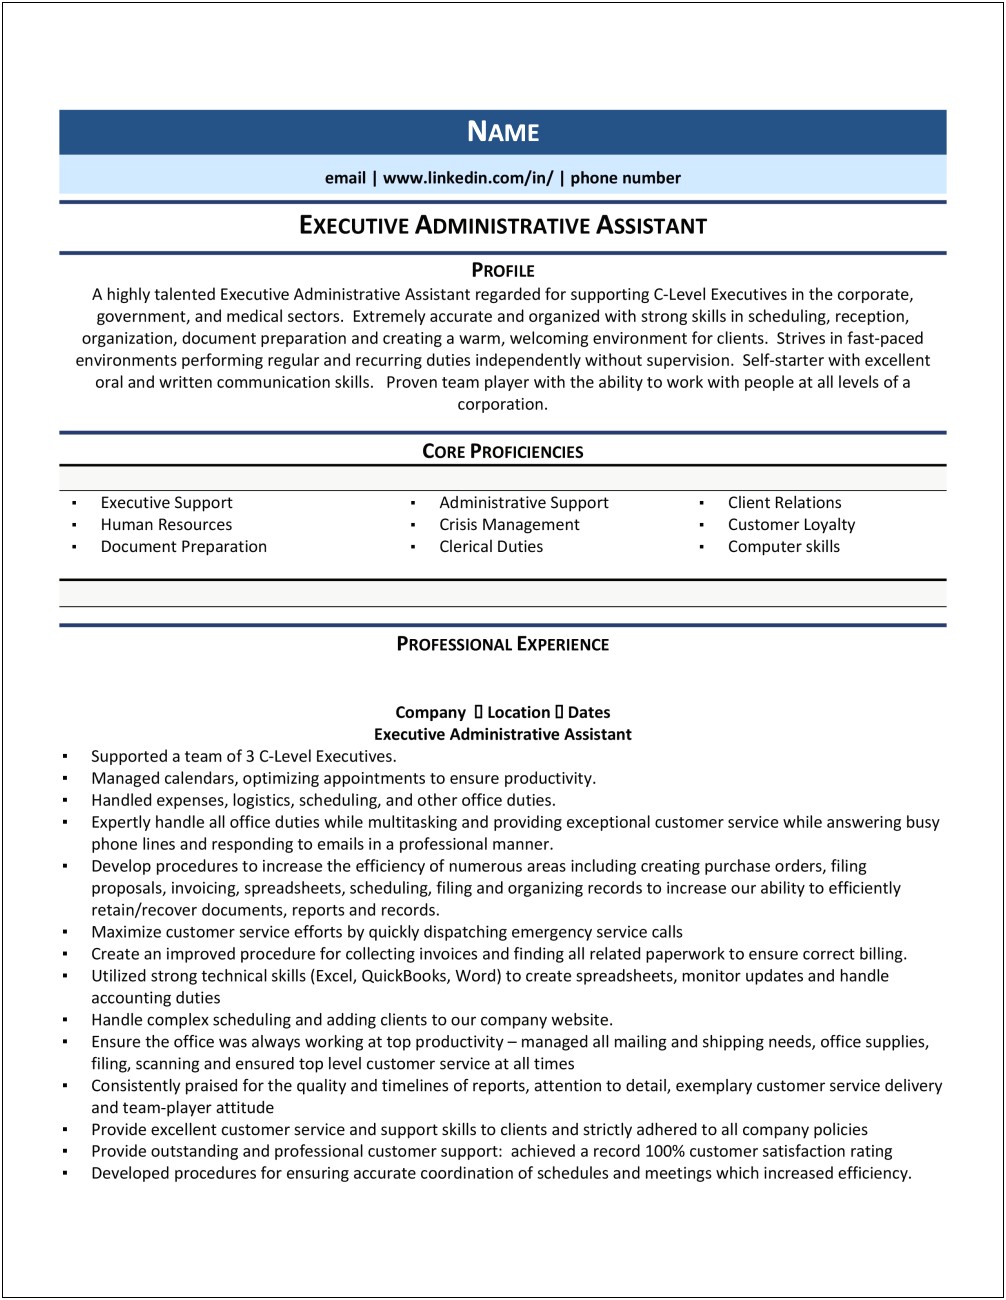 Resume Sample For Boeing Executive Administrative Assistant